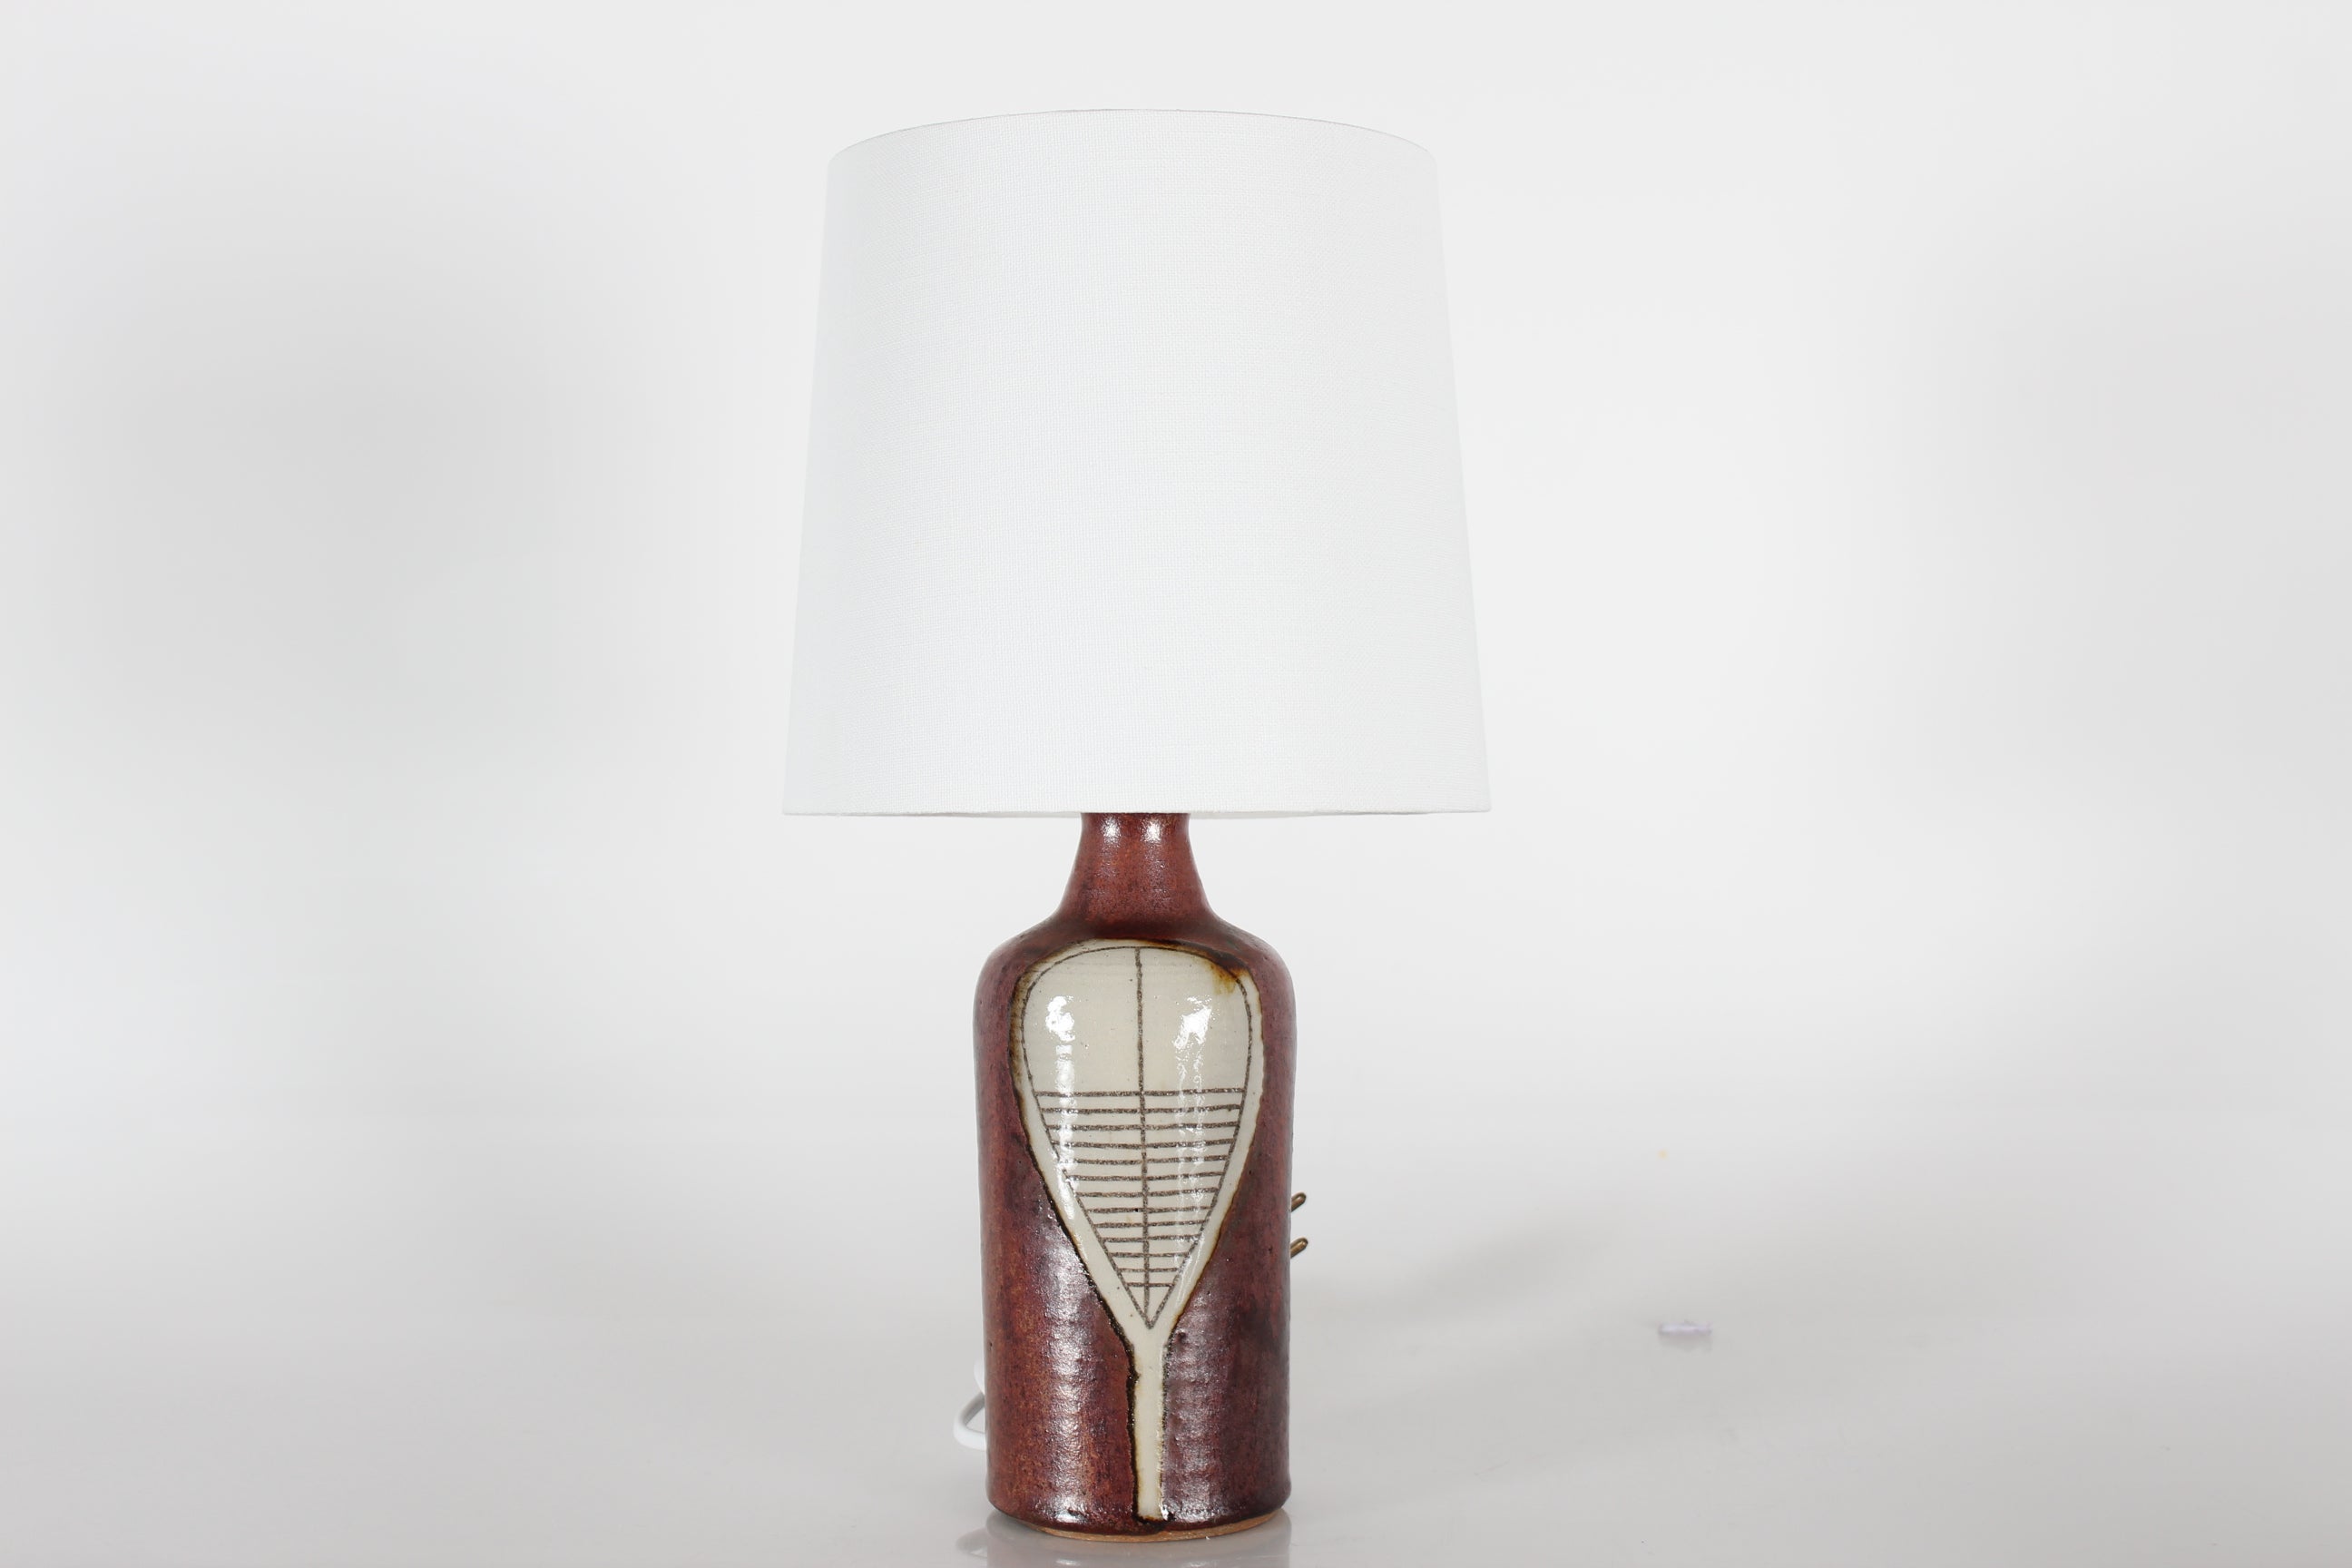 Sculptural stoneware table lamp by danish artist Gunver Bilde Sørensen (1931-2018) 
It's made at her own ceramic work-shop in Denmark circa 1970s

The slightly rustic texture of the chamotte clay covered with matte reddish brown glaze is contrasted